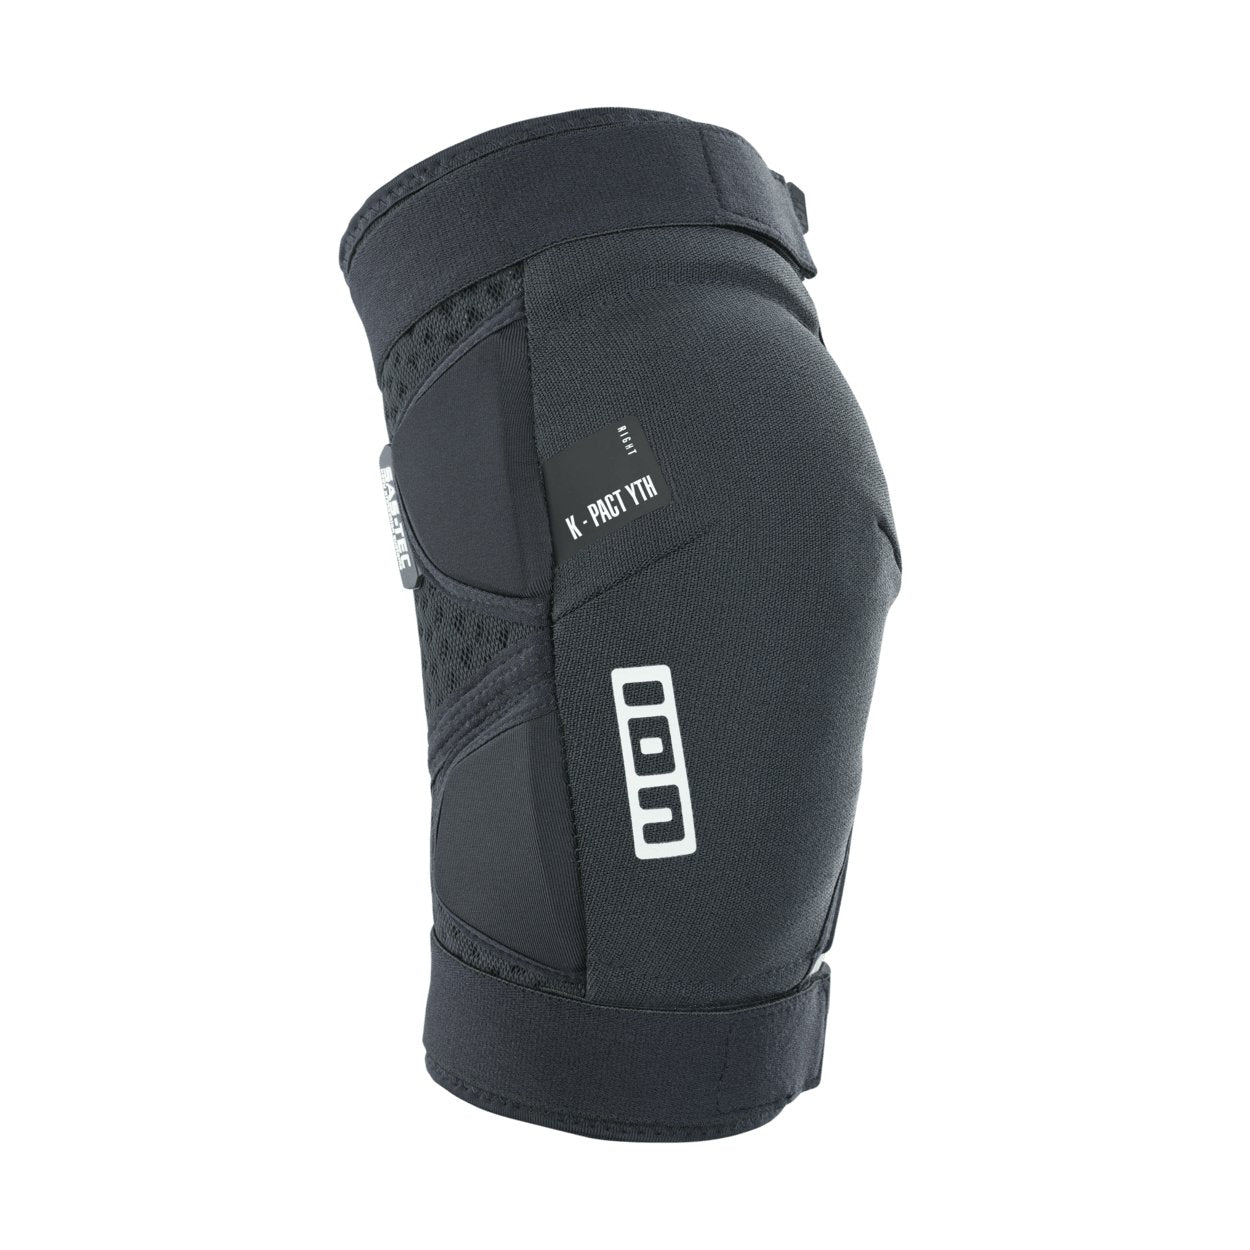 ION Youth MTB Knee Pads K-Pact 2024 - Worthing Watersports - 9008415981632 - Body Armor - ION Bike